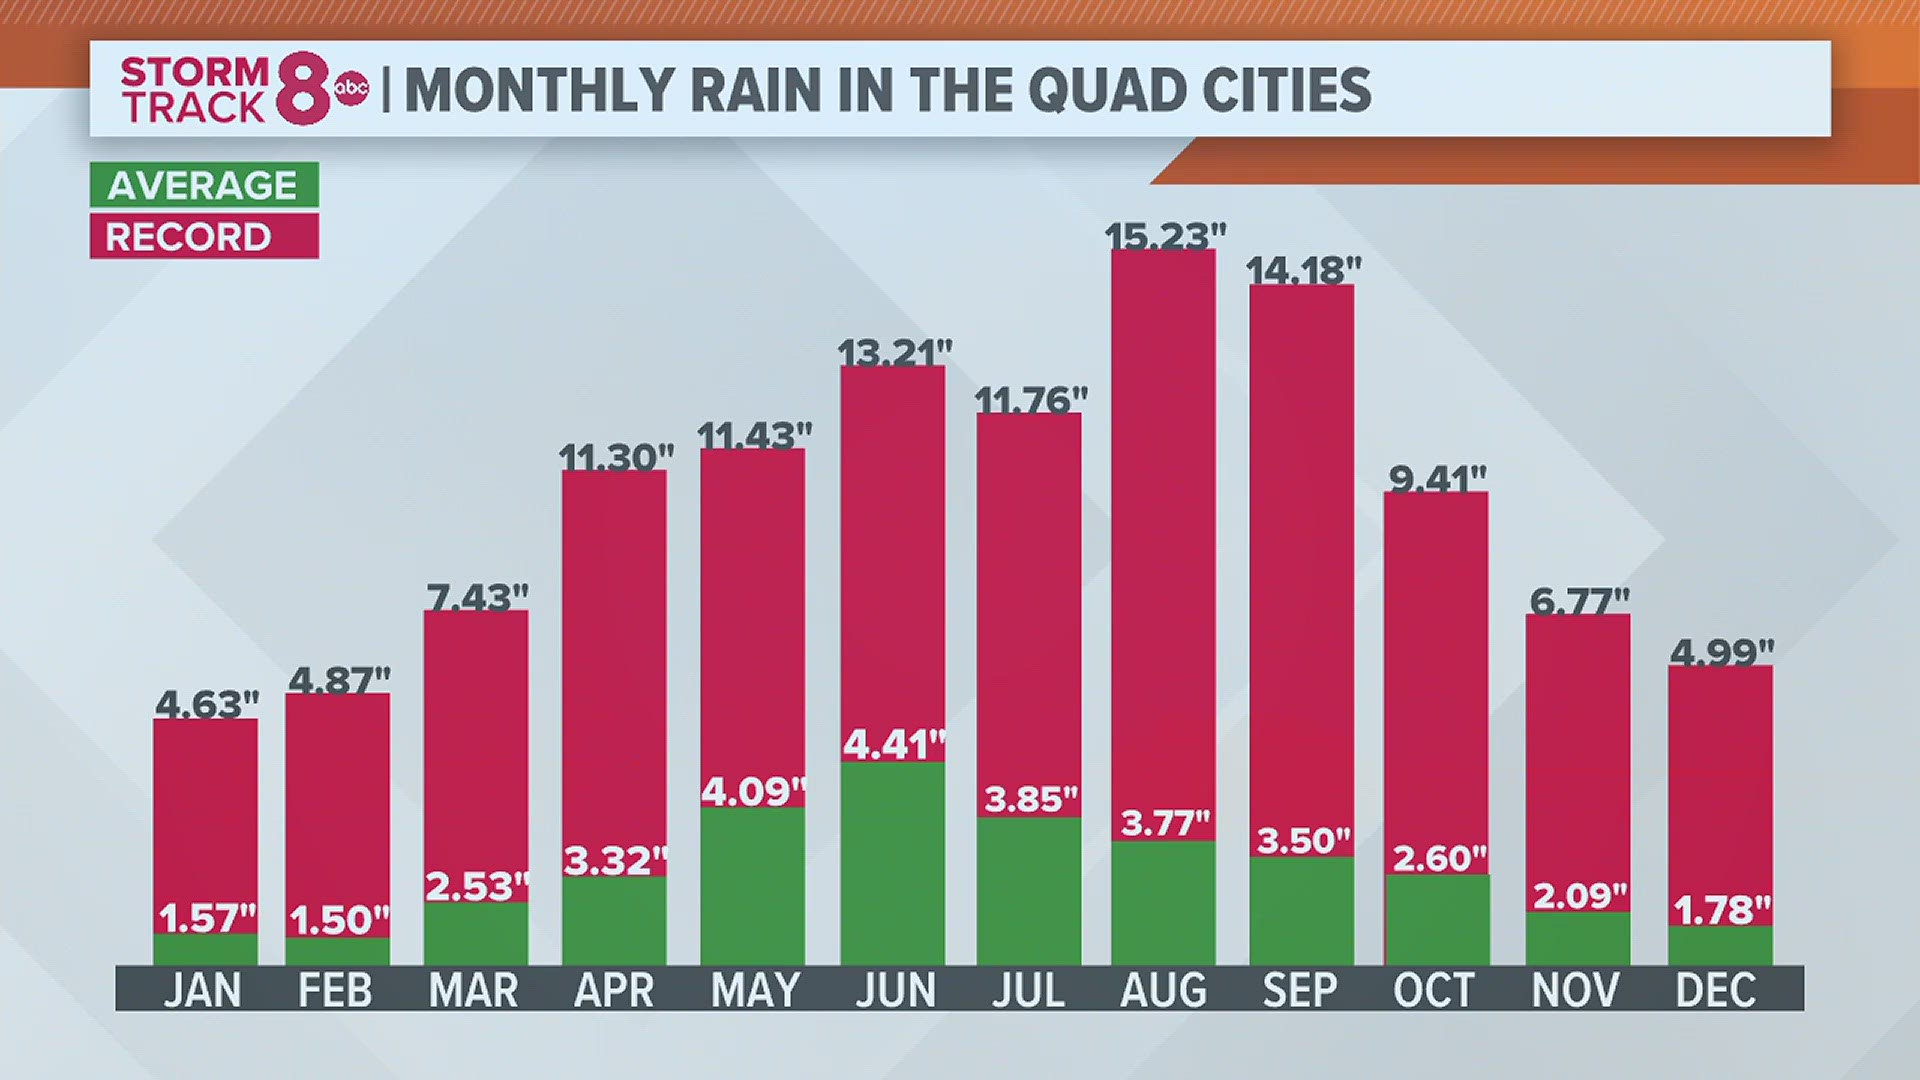 The heaviest rain typically falls during the warmer months since warmer air is capable of holding more moisture.